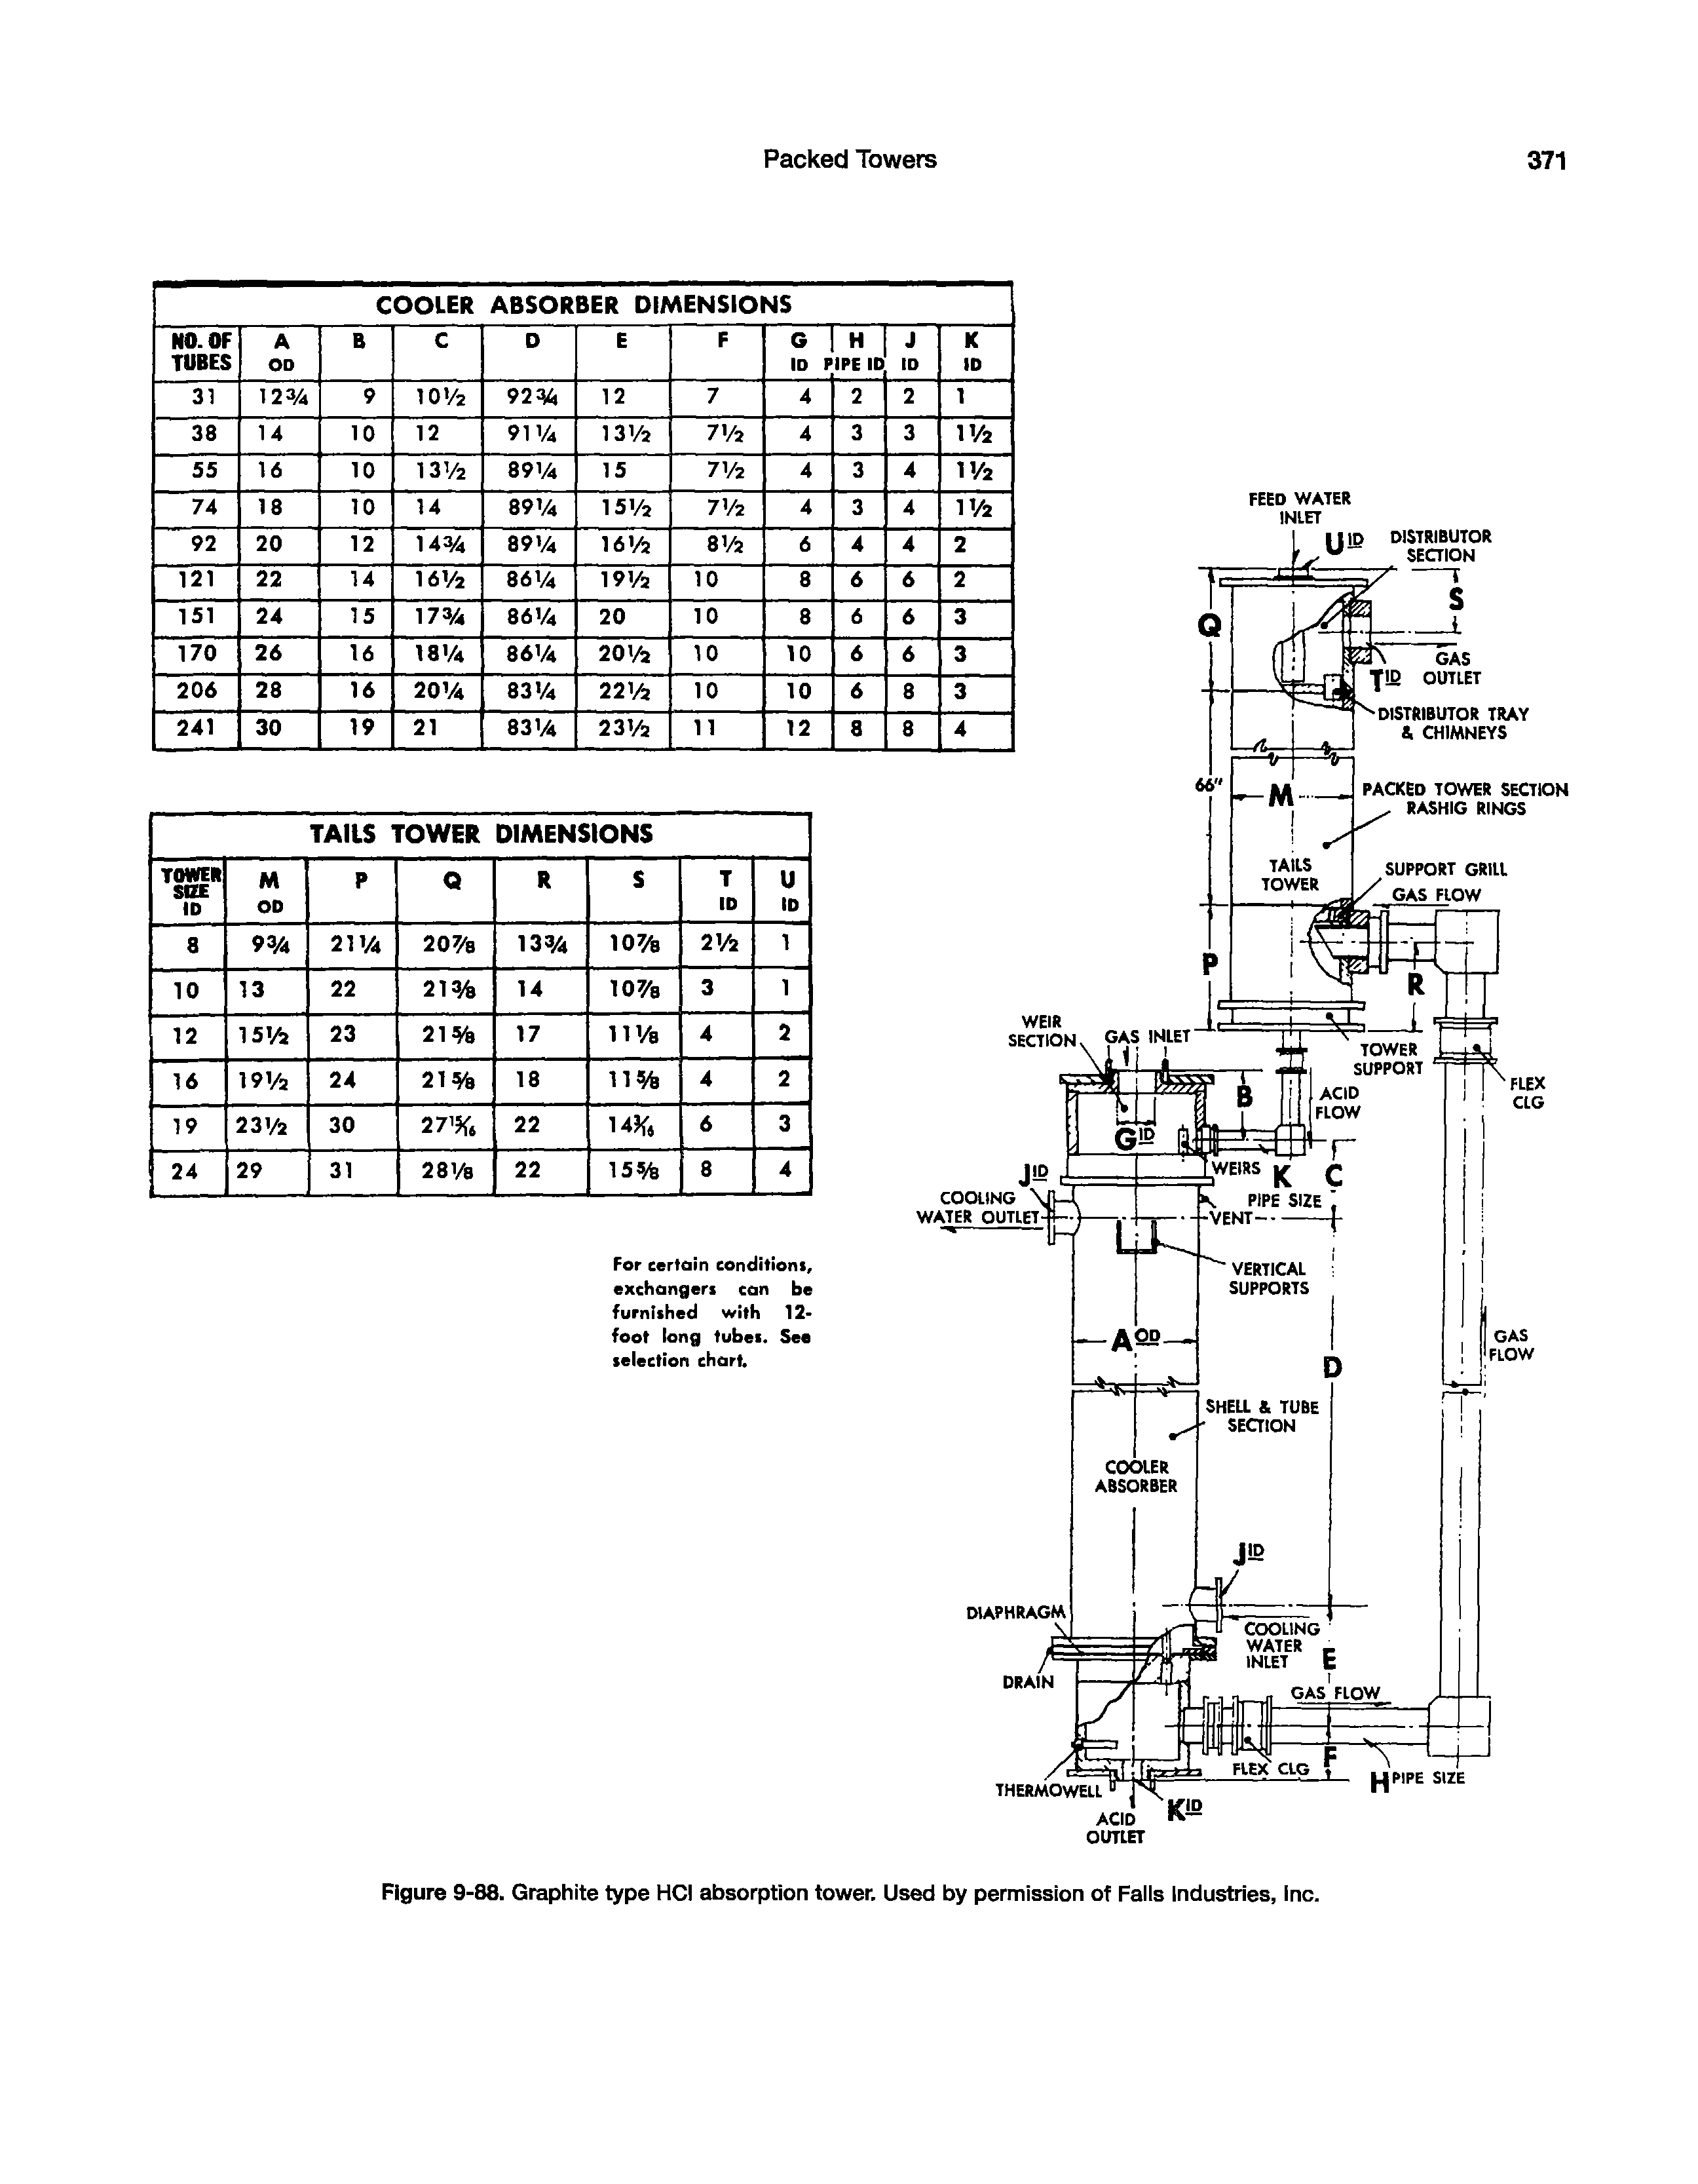 Figure 9-88. Graphite type HCI absorption tower. Used by permission of Fails Industries, Inc.